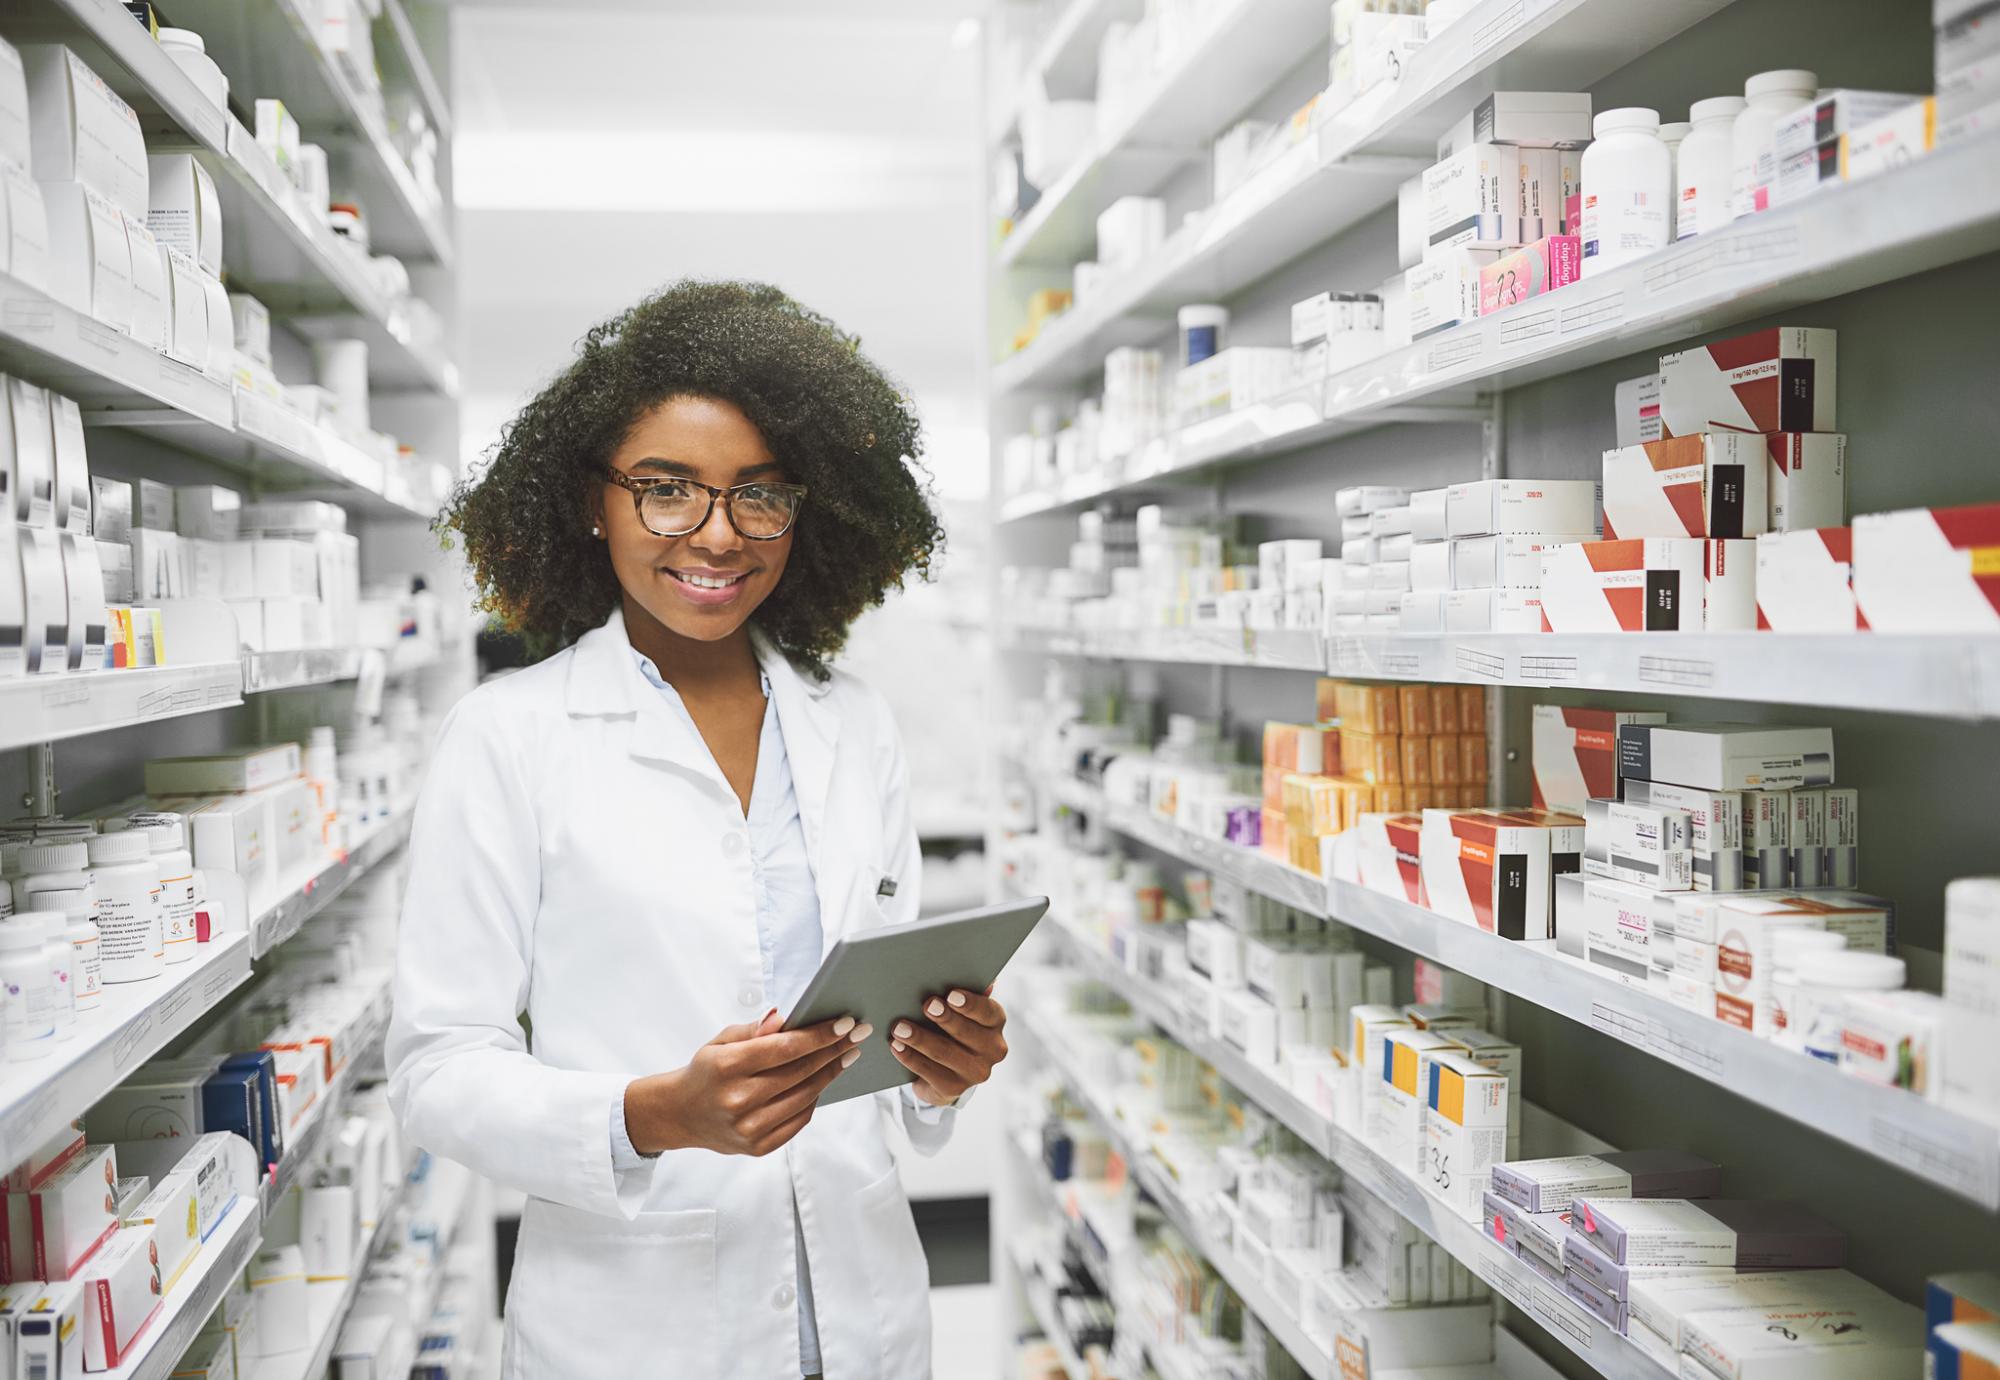 Young female pharmacist standing in an aisle of pharmaceuticals